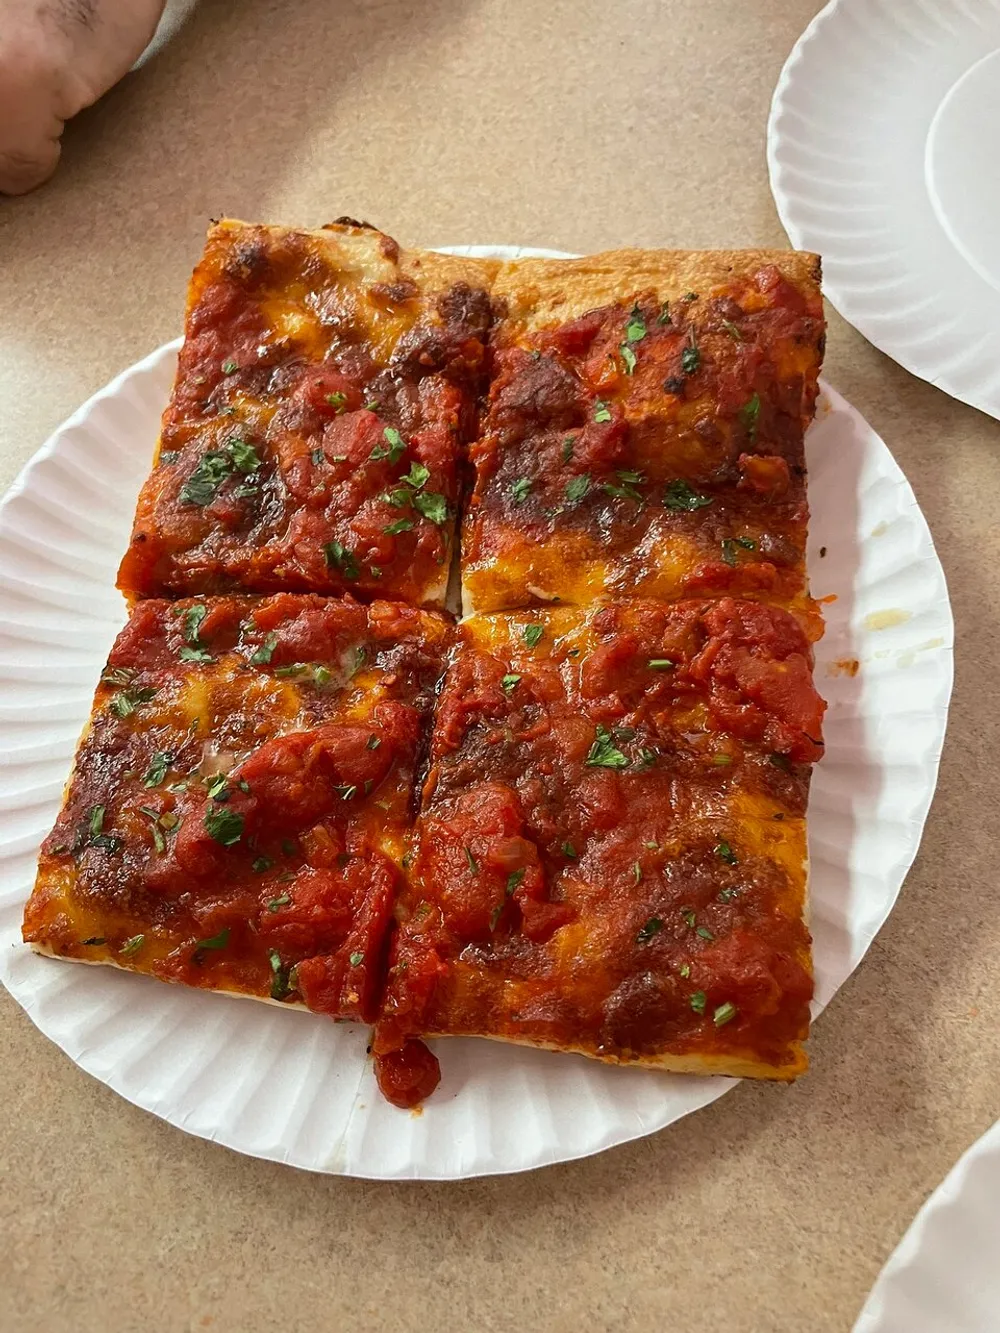 This is an image of two square slices of pizza with tomato sauce and bits of herbs resting on a white paper plate